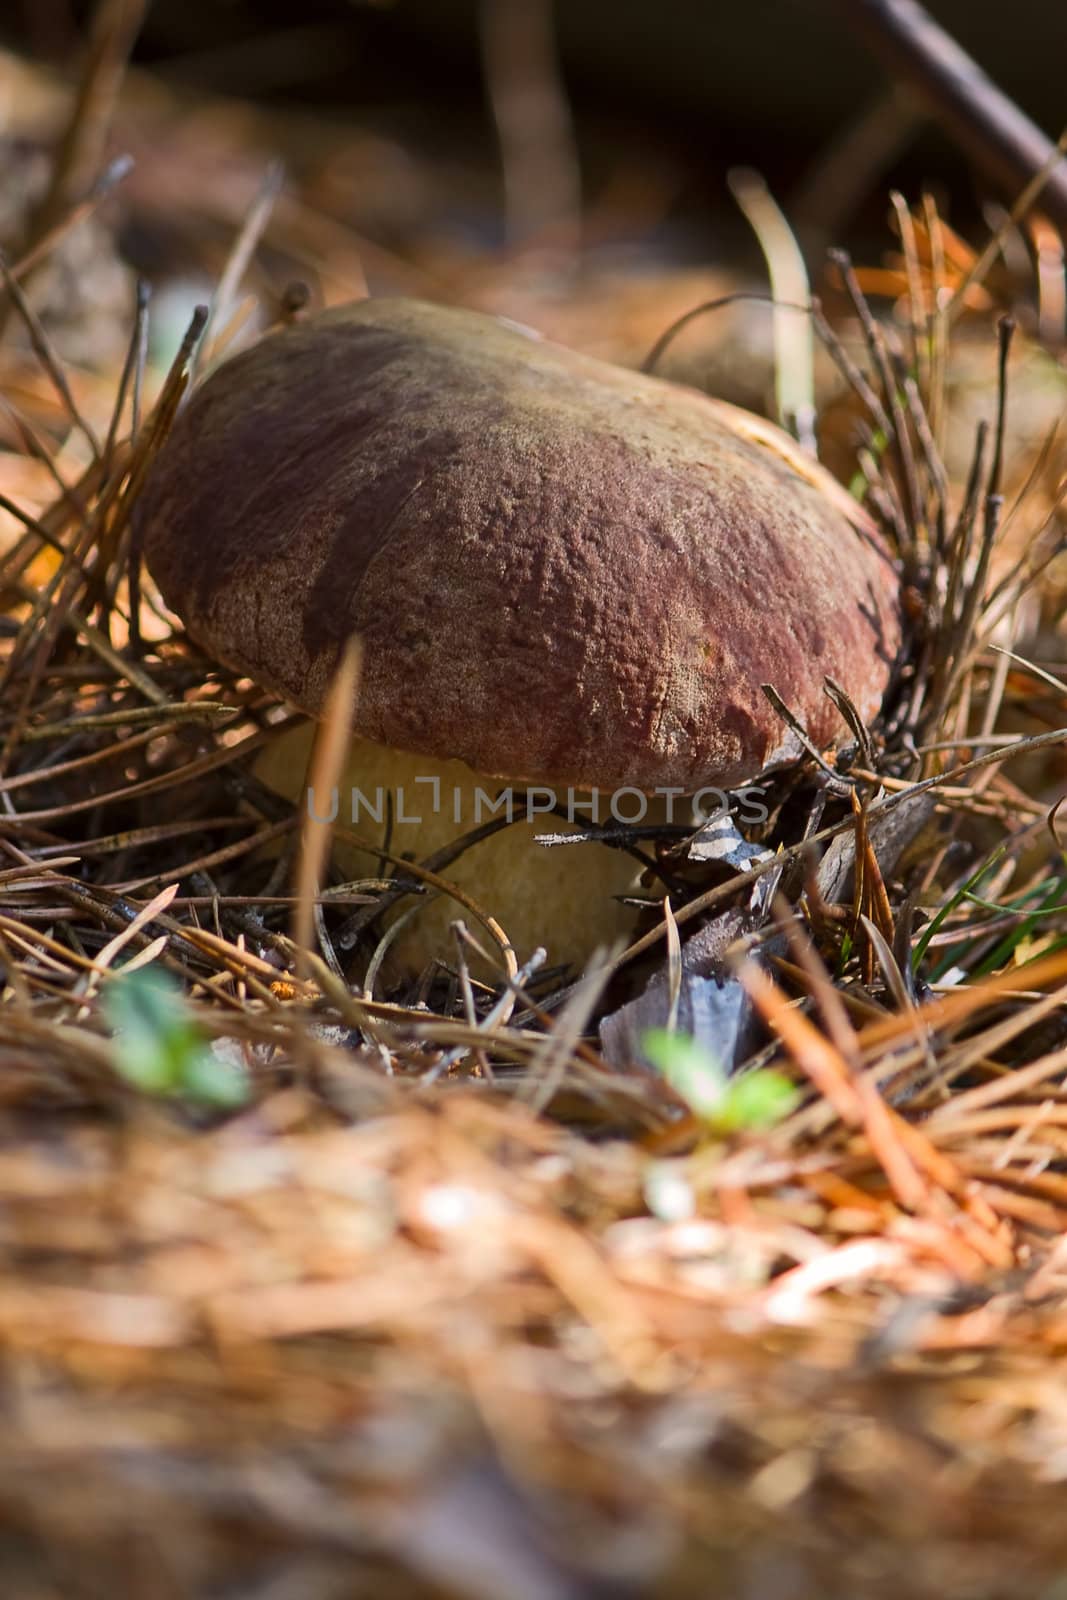 Mushroom in  woods. Image with shallow depth of field.